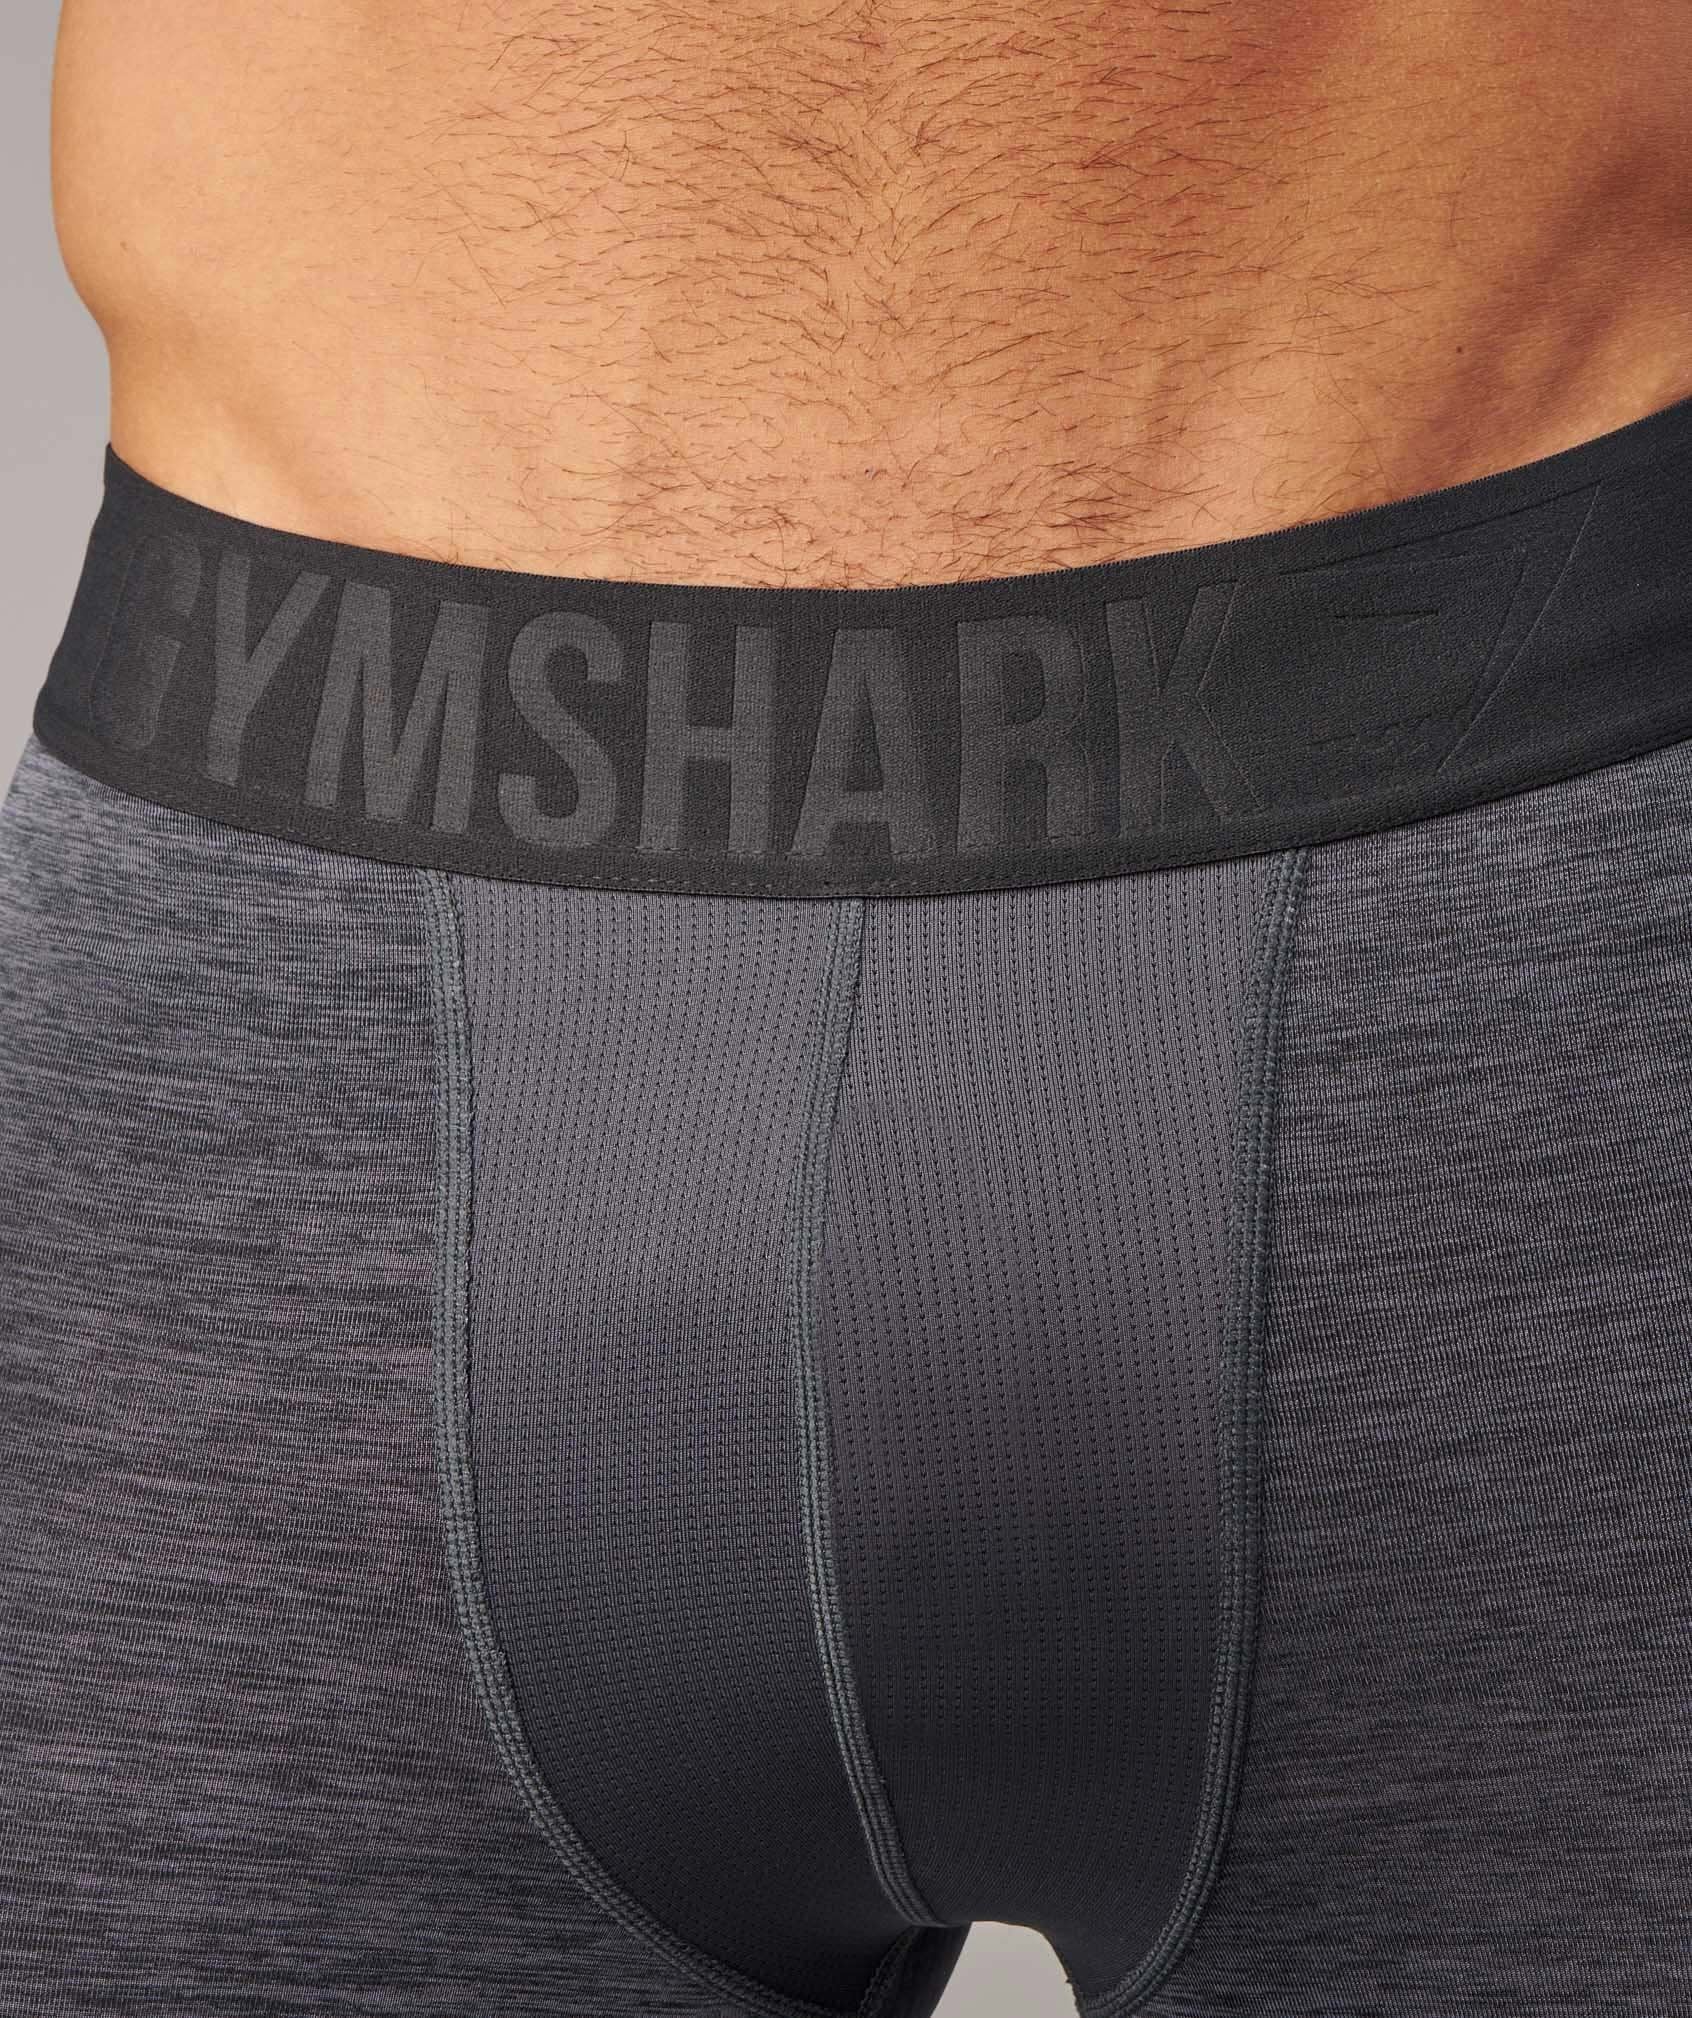 Element Baselayer Shorts in Charcoal Marl - view 5